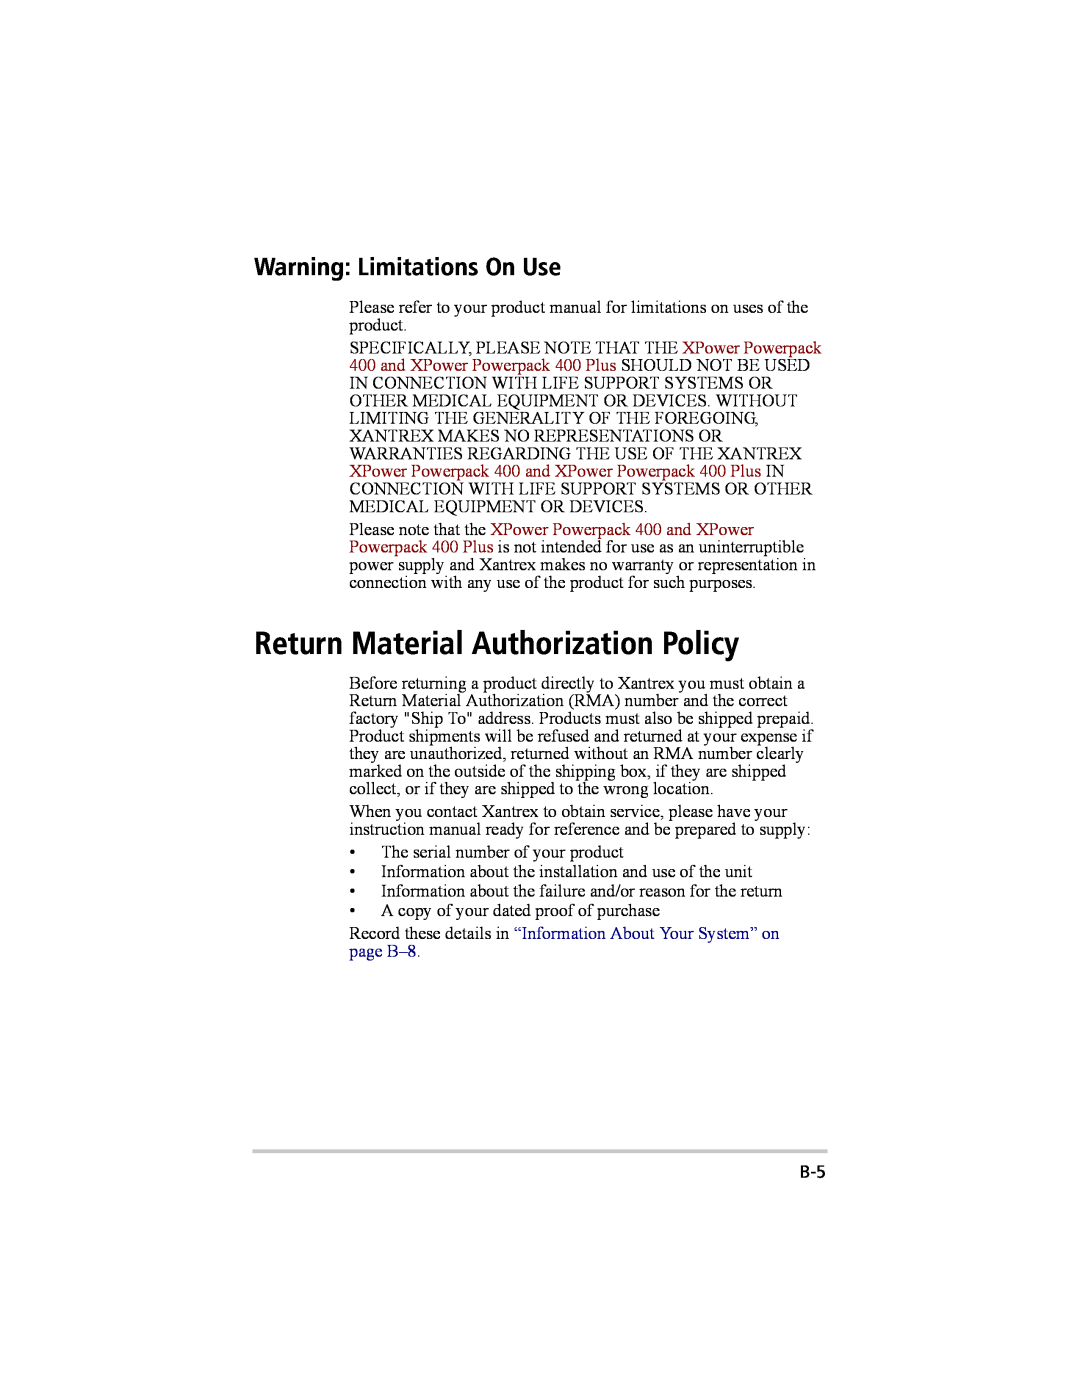 Xantrex Technology 200 manual Return Material Authorization Policy, Warning Limitations On Use 